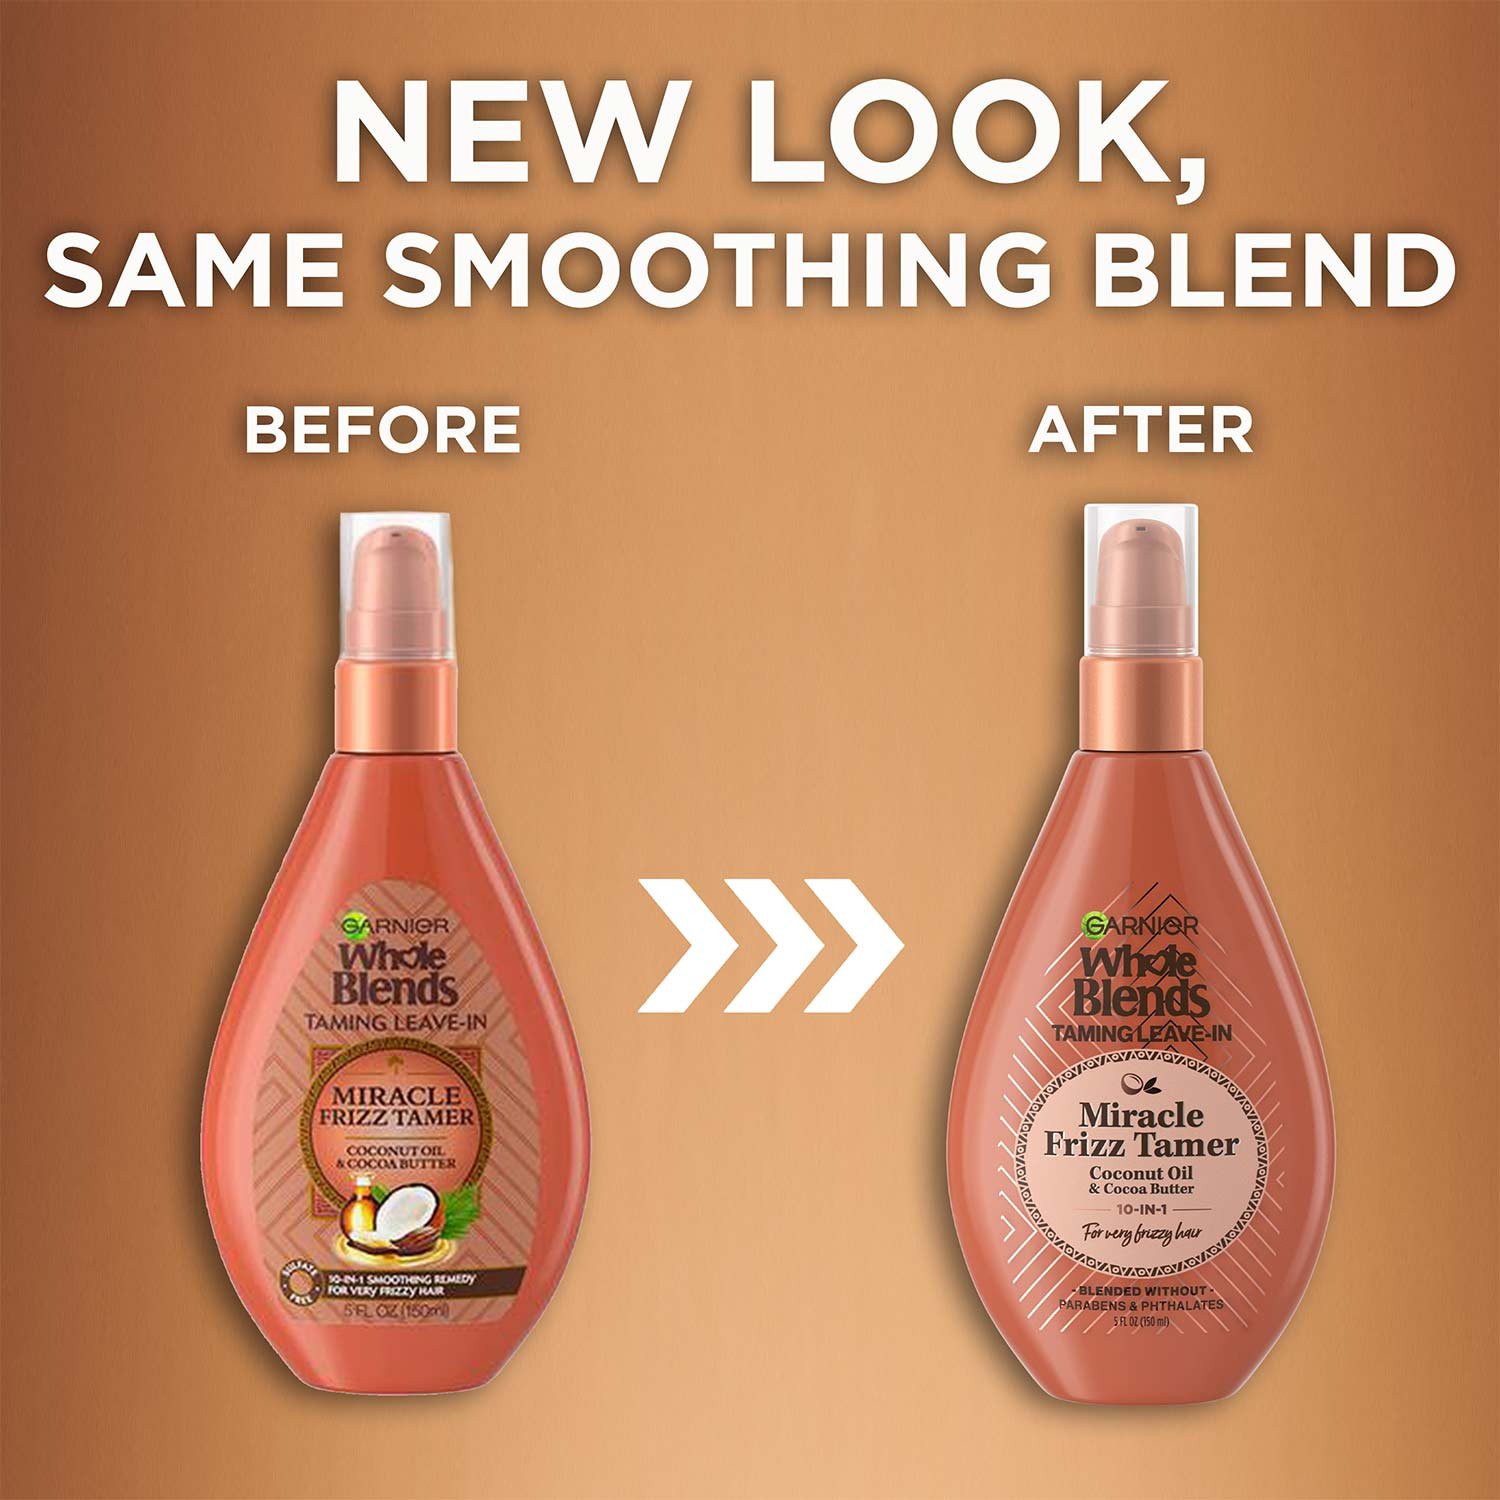 Whole Blends Coco Cocoa frizz tamer new look, same blend